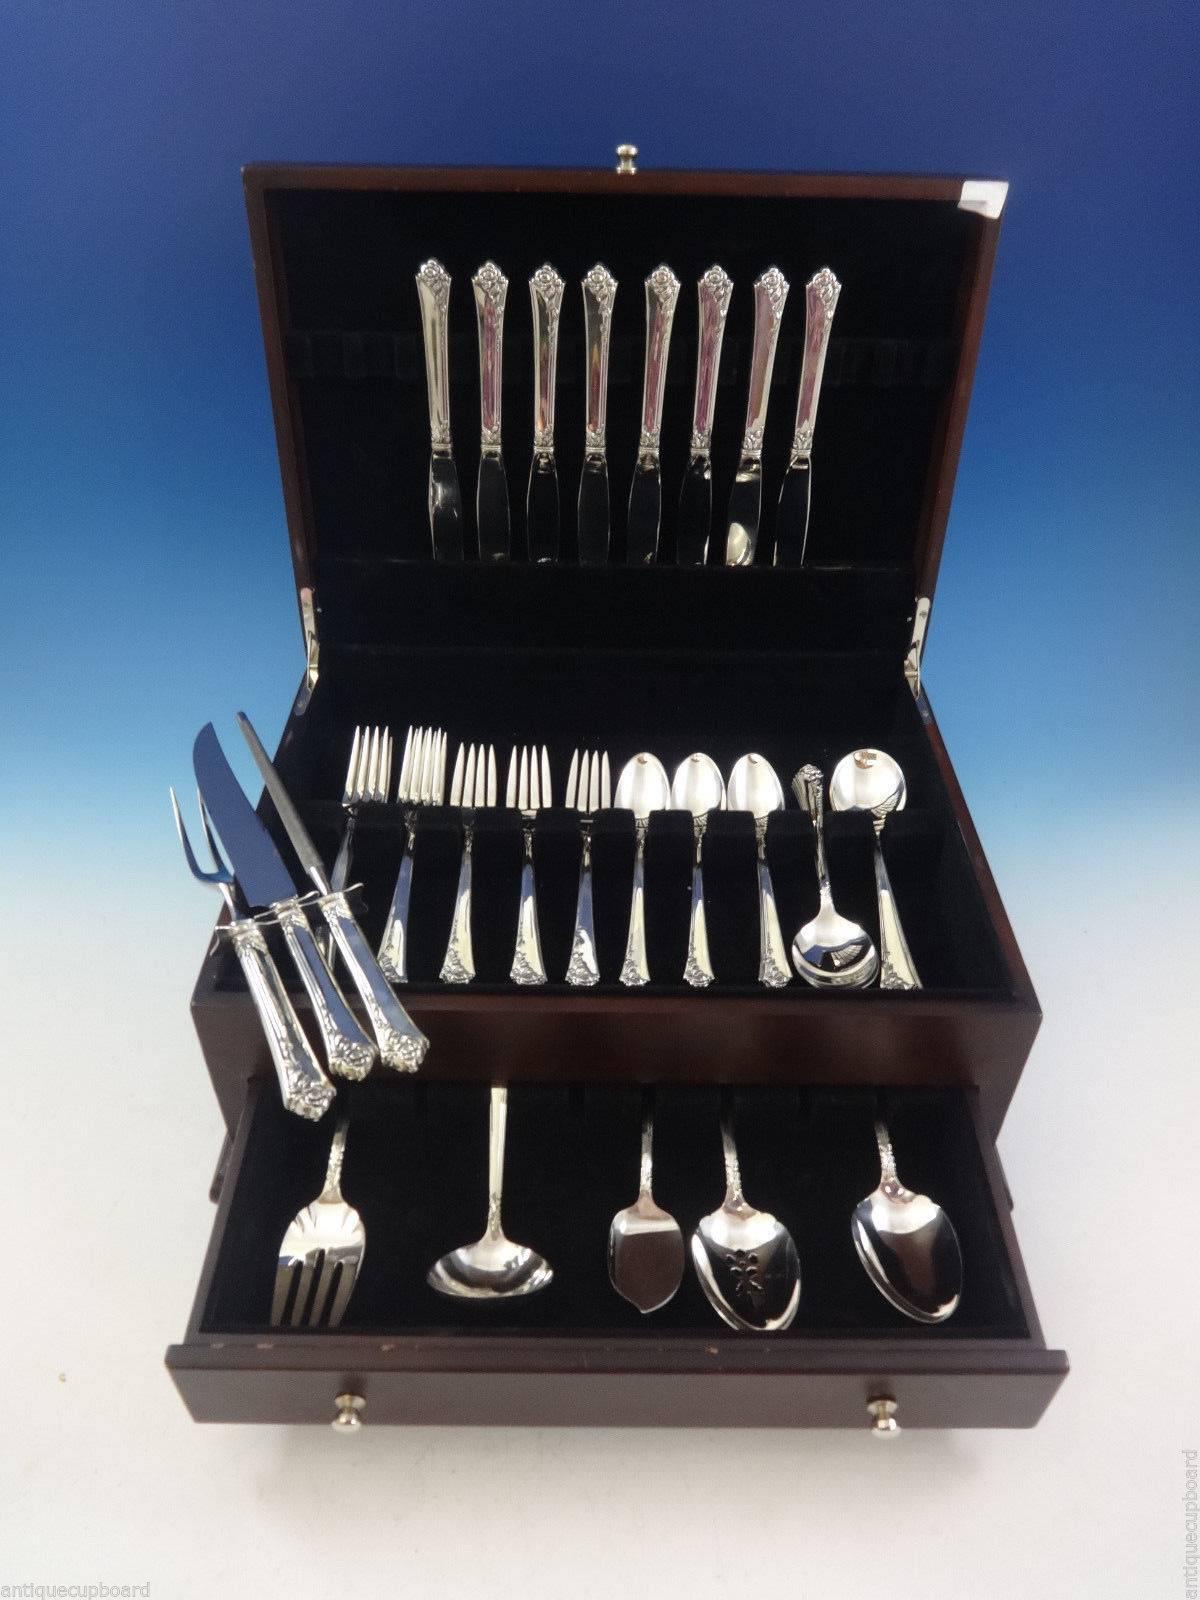 Damask Rose by Oneida sterling silver flatware set, 48 piece set. This set includes:

Eight knives, 8 3/4